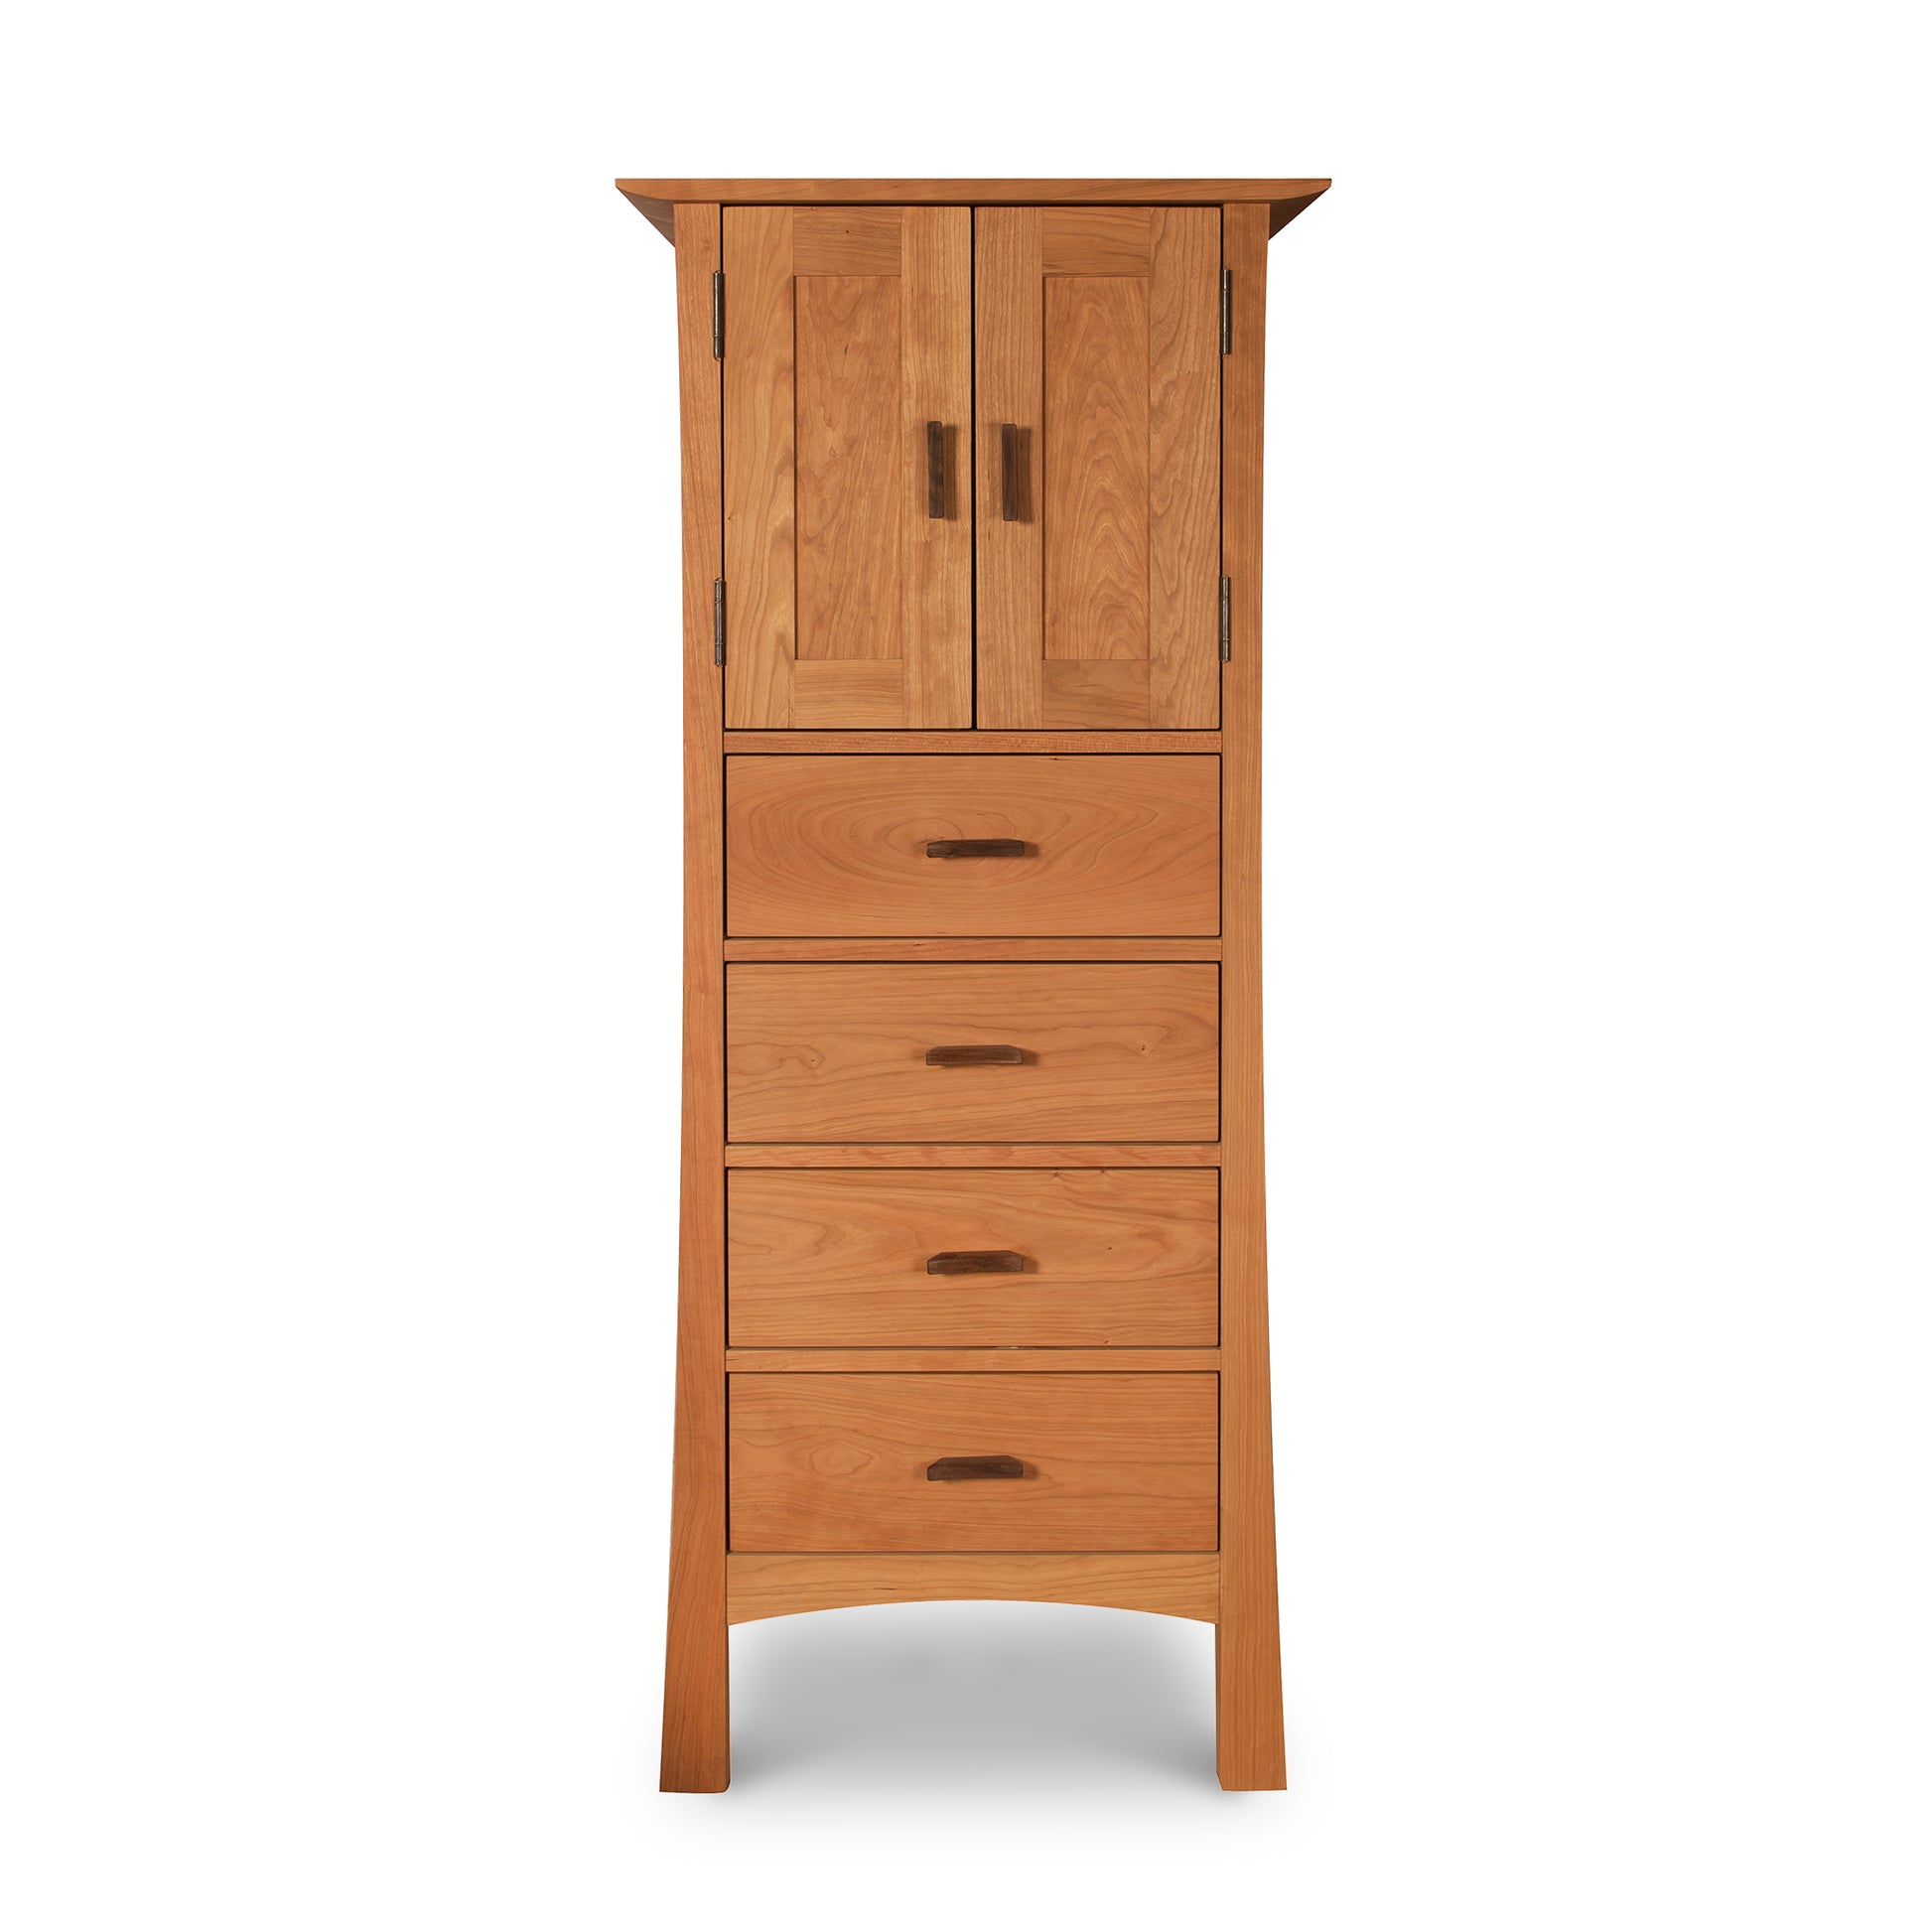 A Vermont Furniture Designs Contemporary Craftsman Tall Storage Chest, featuring a tall wooden cabinet with three drawers, is a contemporary storage solution for a modern bedroom.